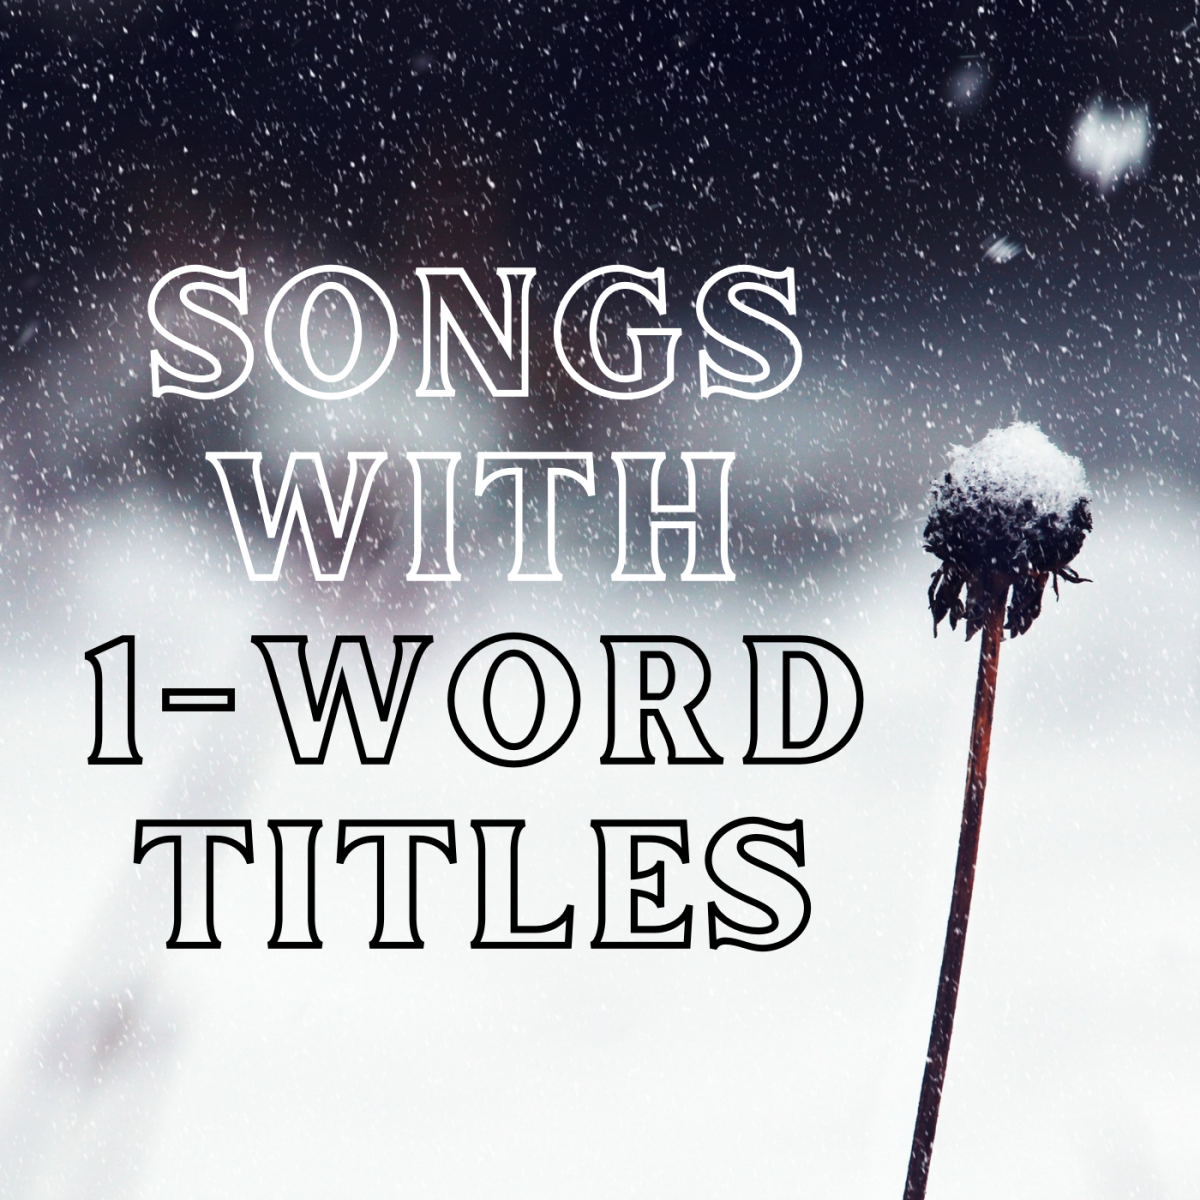 Find some songs with single-word titles to add to your playlist.